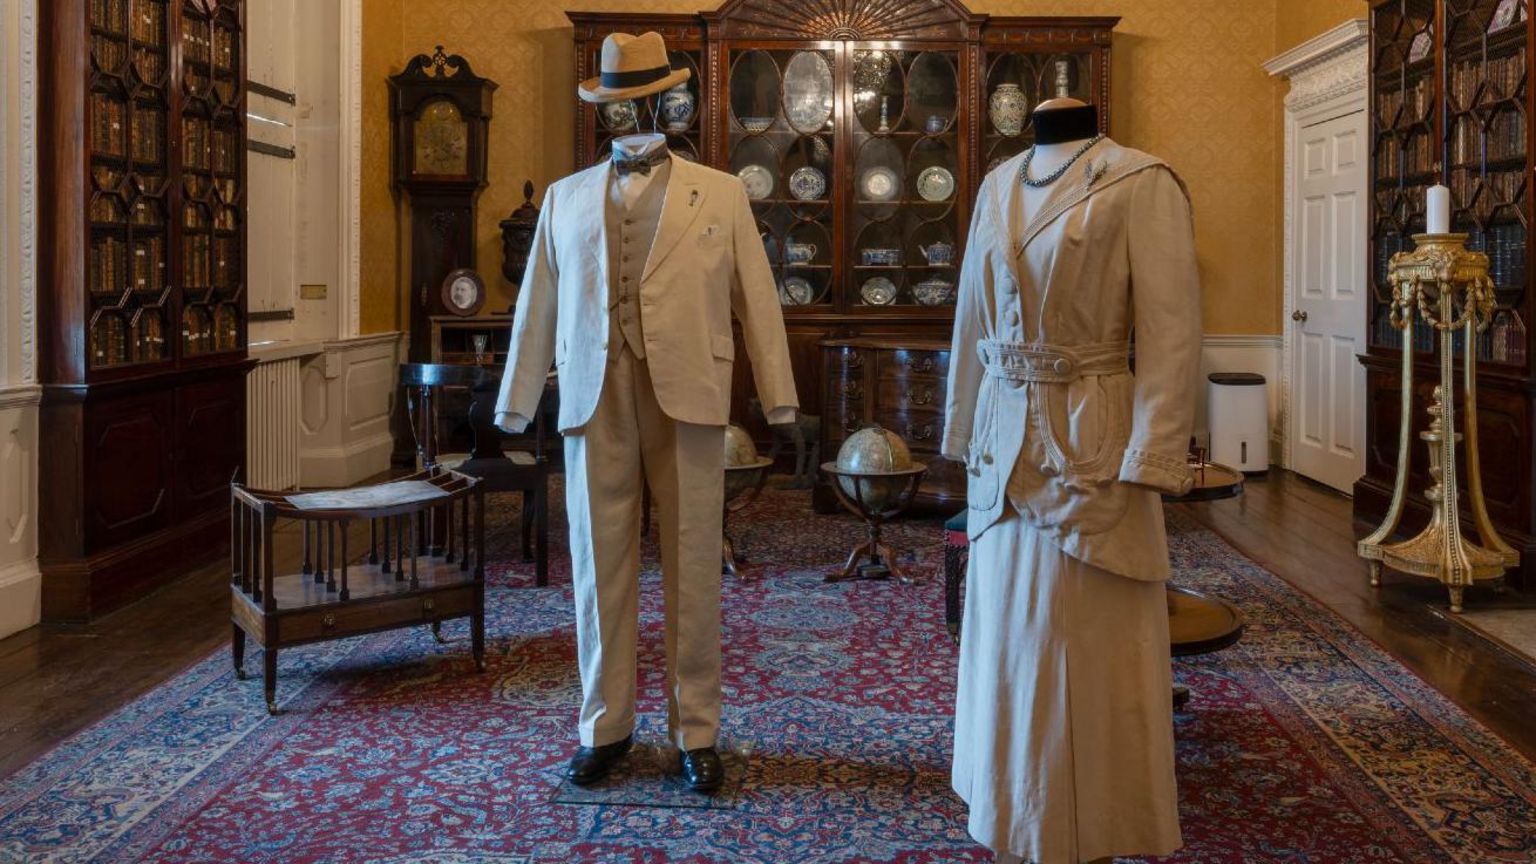 A man's linen suit with straw Panama hat and a woman's cream linen and silk skirt and jacket - both in a 1930s style